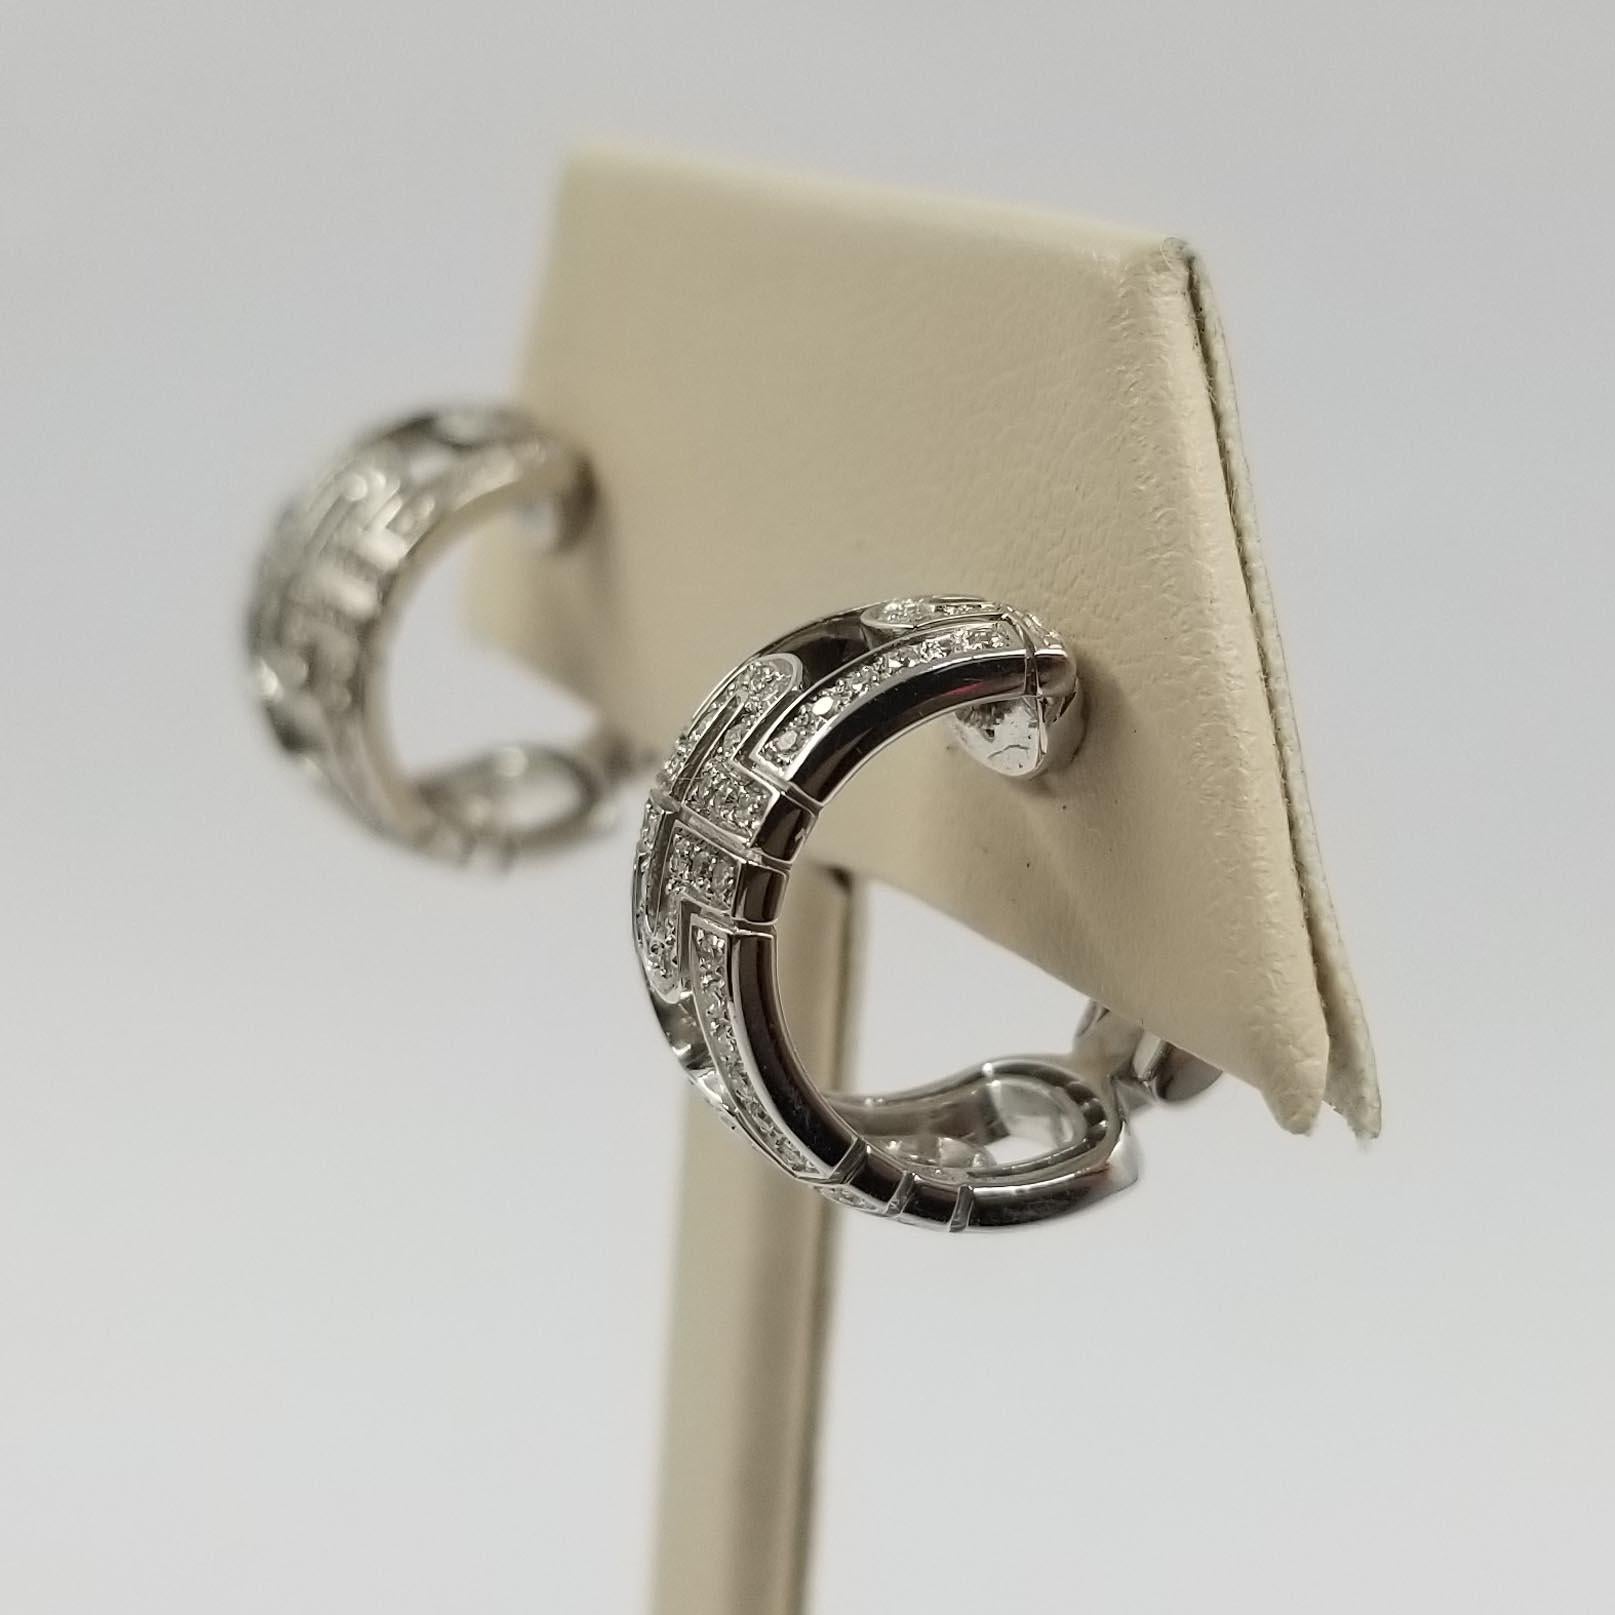 These 18 karat white gold and diamond hoop earrings are crafted by Bulgari, in their Parentensi collection. They feature approximately 0.60 carat total weight of round brilliant cut diamonds of VS clarity & G color. Earring tops are slightly angled